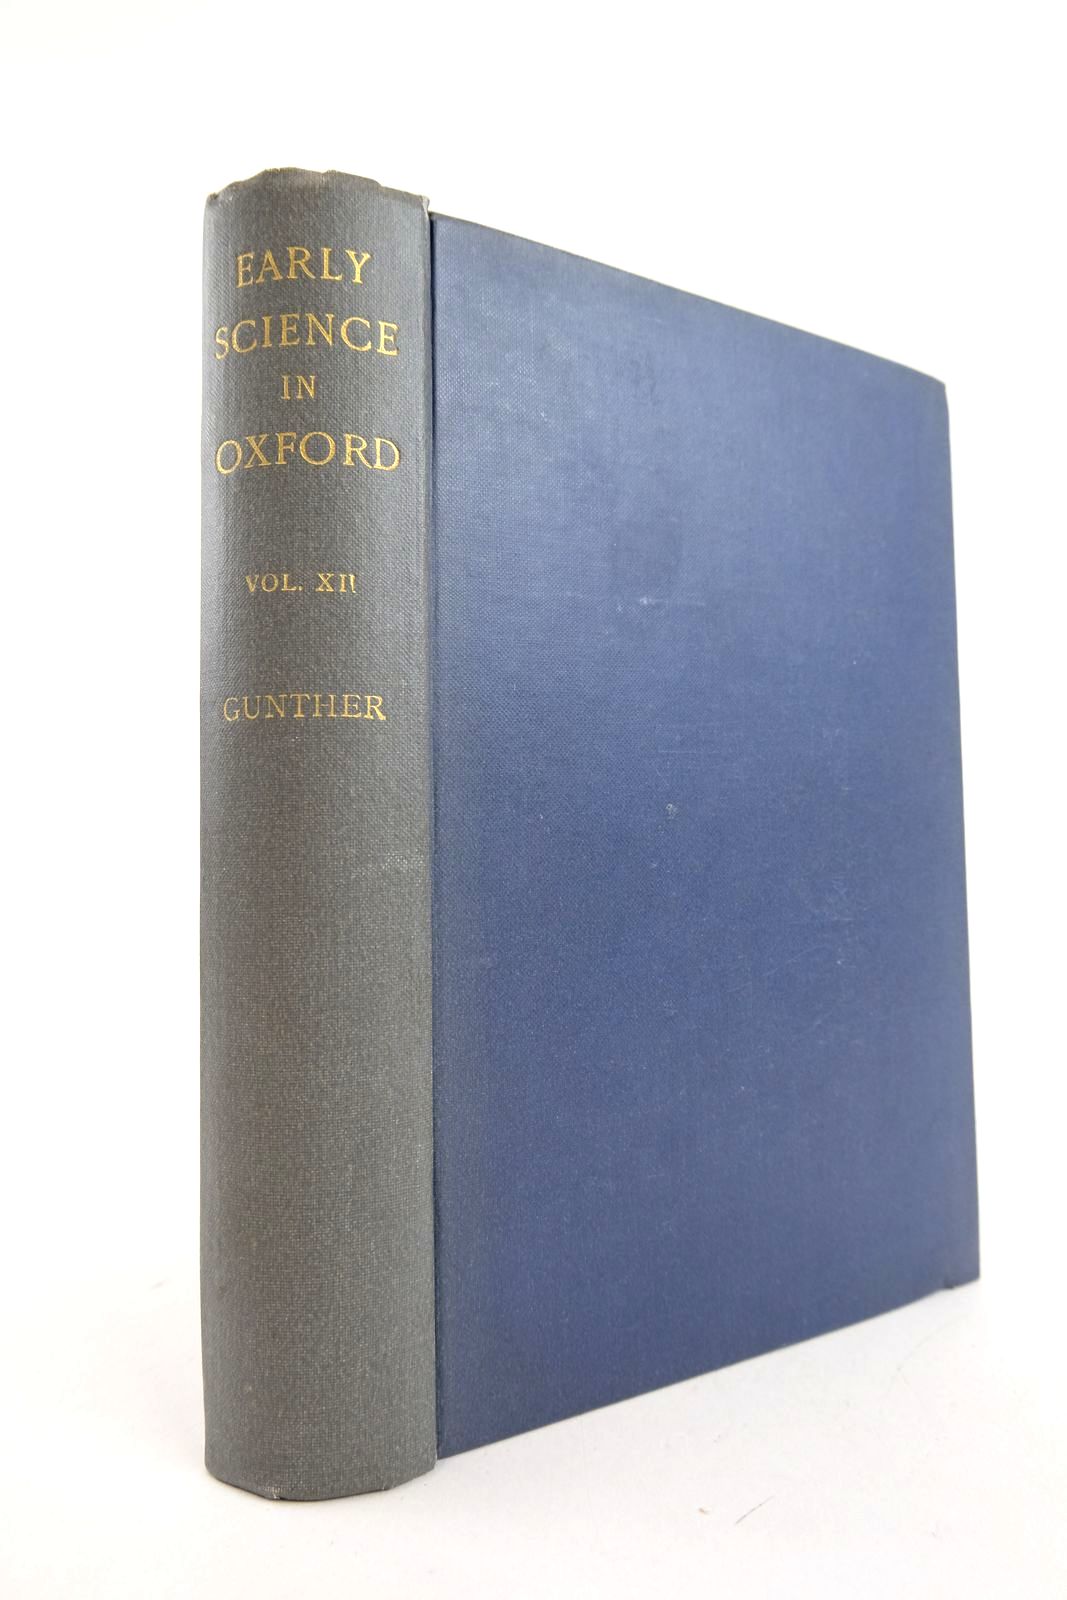 Photo of EARLY SCIENCE IN OXFORD VOL XII written by Gunther, R.T. published by Oxford University Press (STOCK CODE: 2133146)  for sale by Stella & Rose's Books